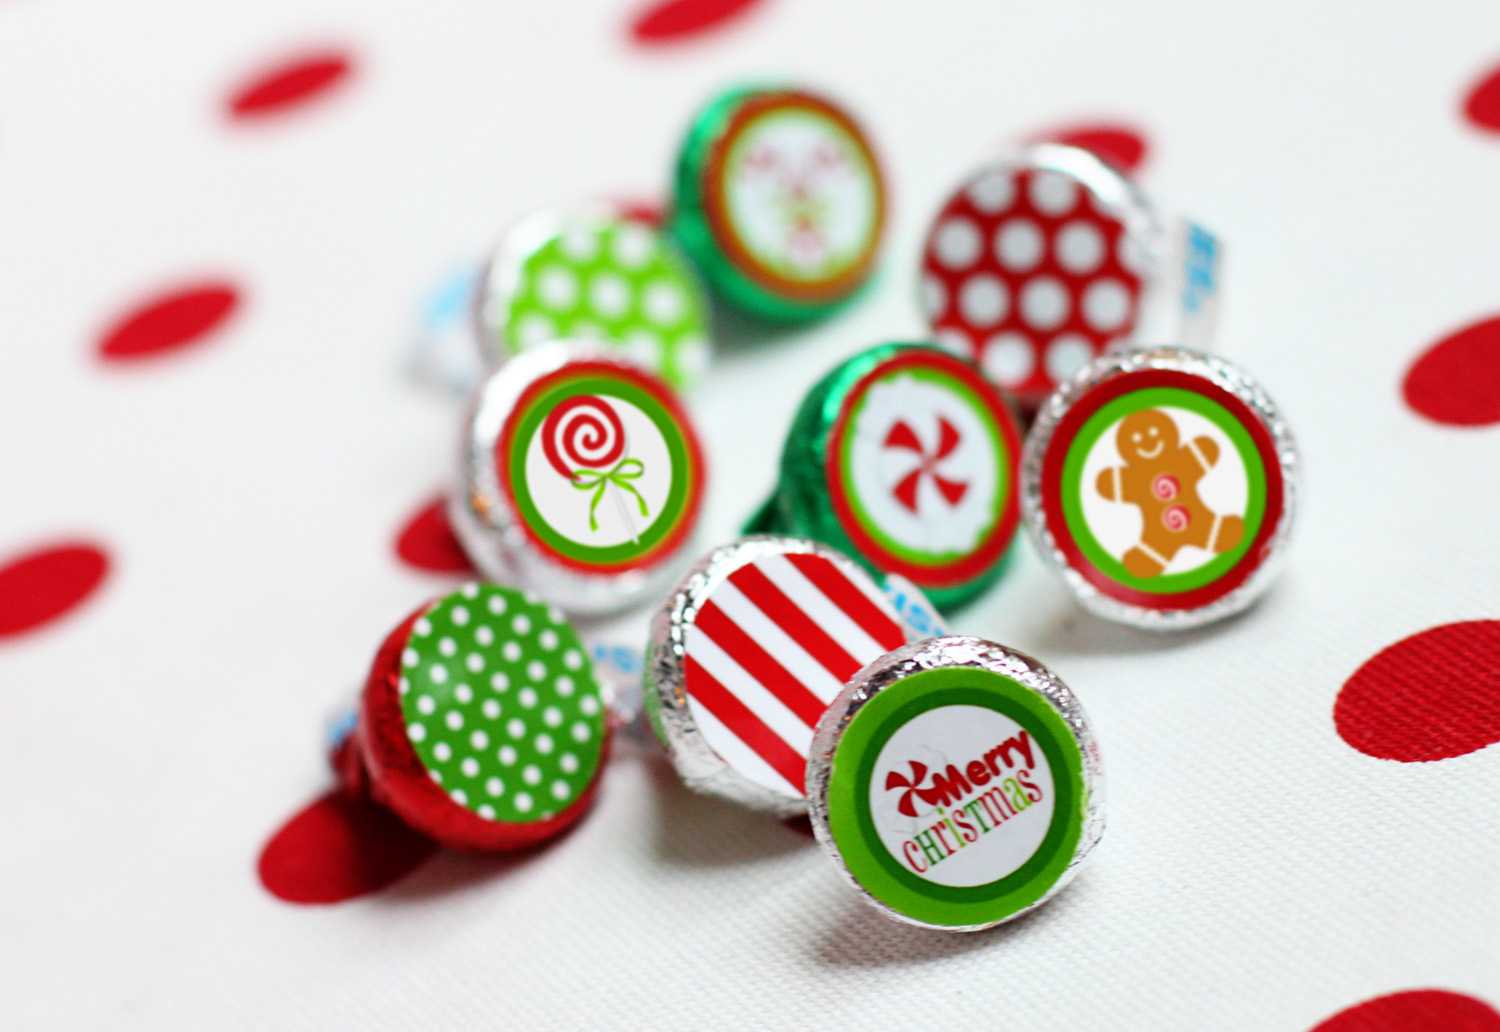 Amanda's Parties To Go: {Freebie} Christmas Hershey's Kiss Intended For Free Hershey Kisses Labels Template